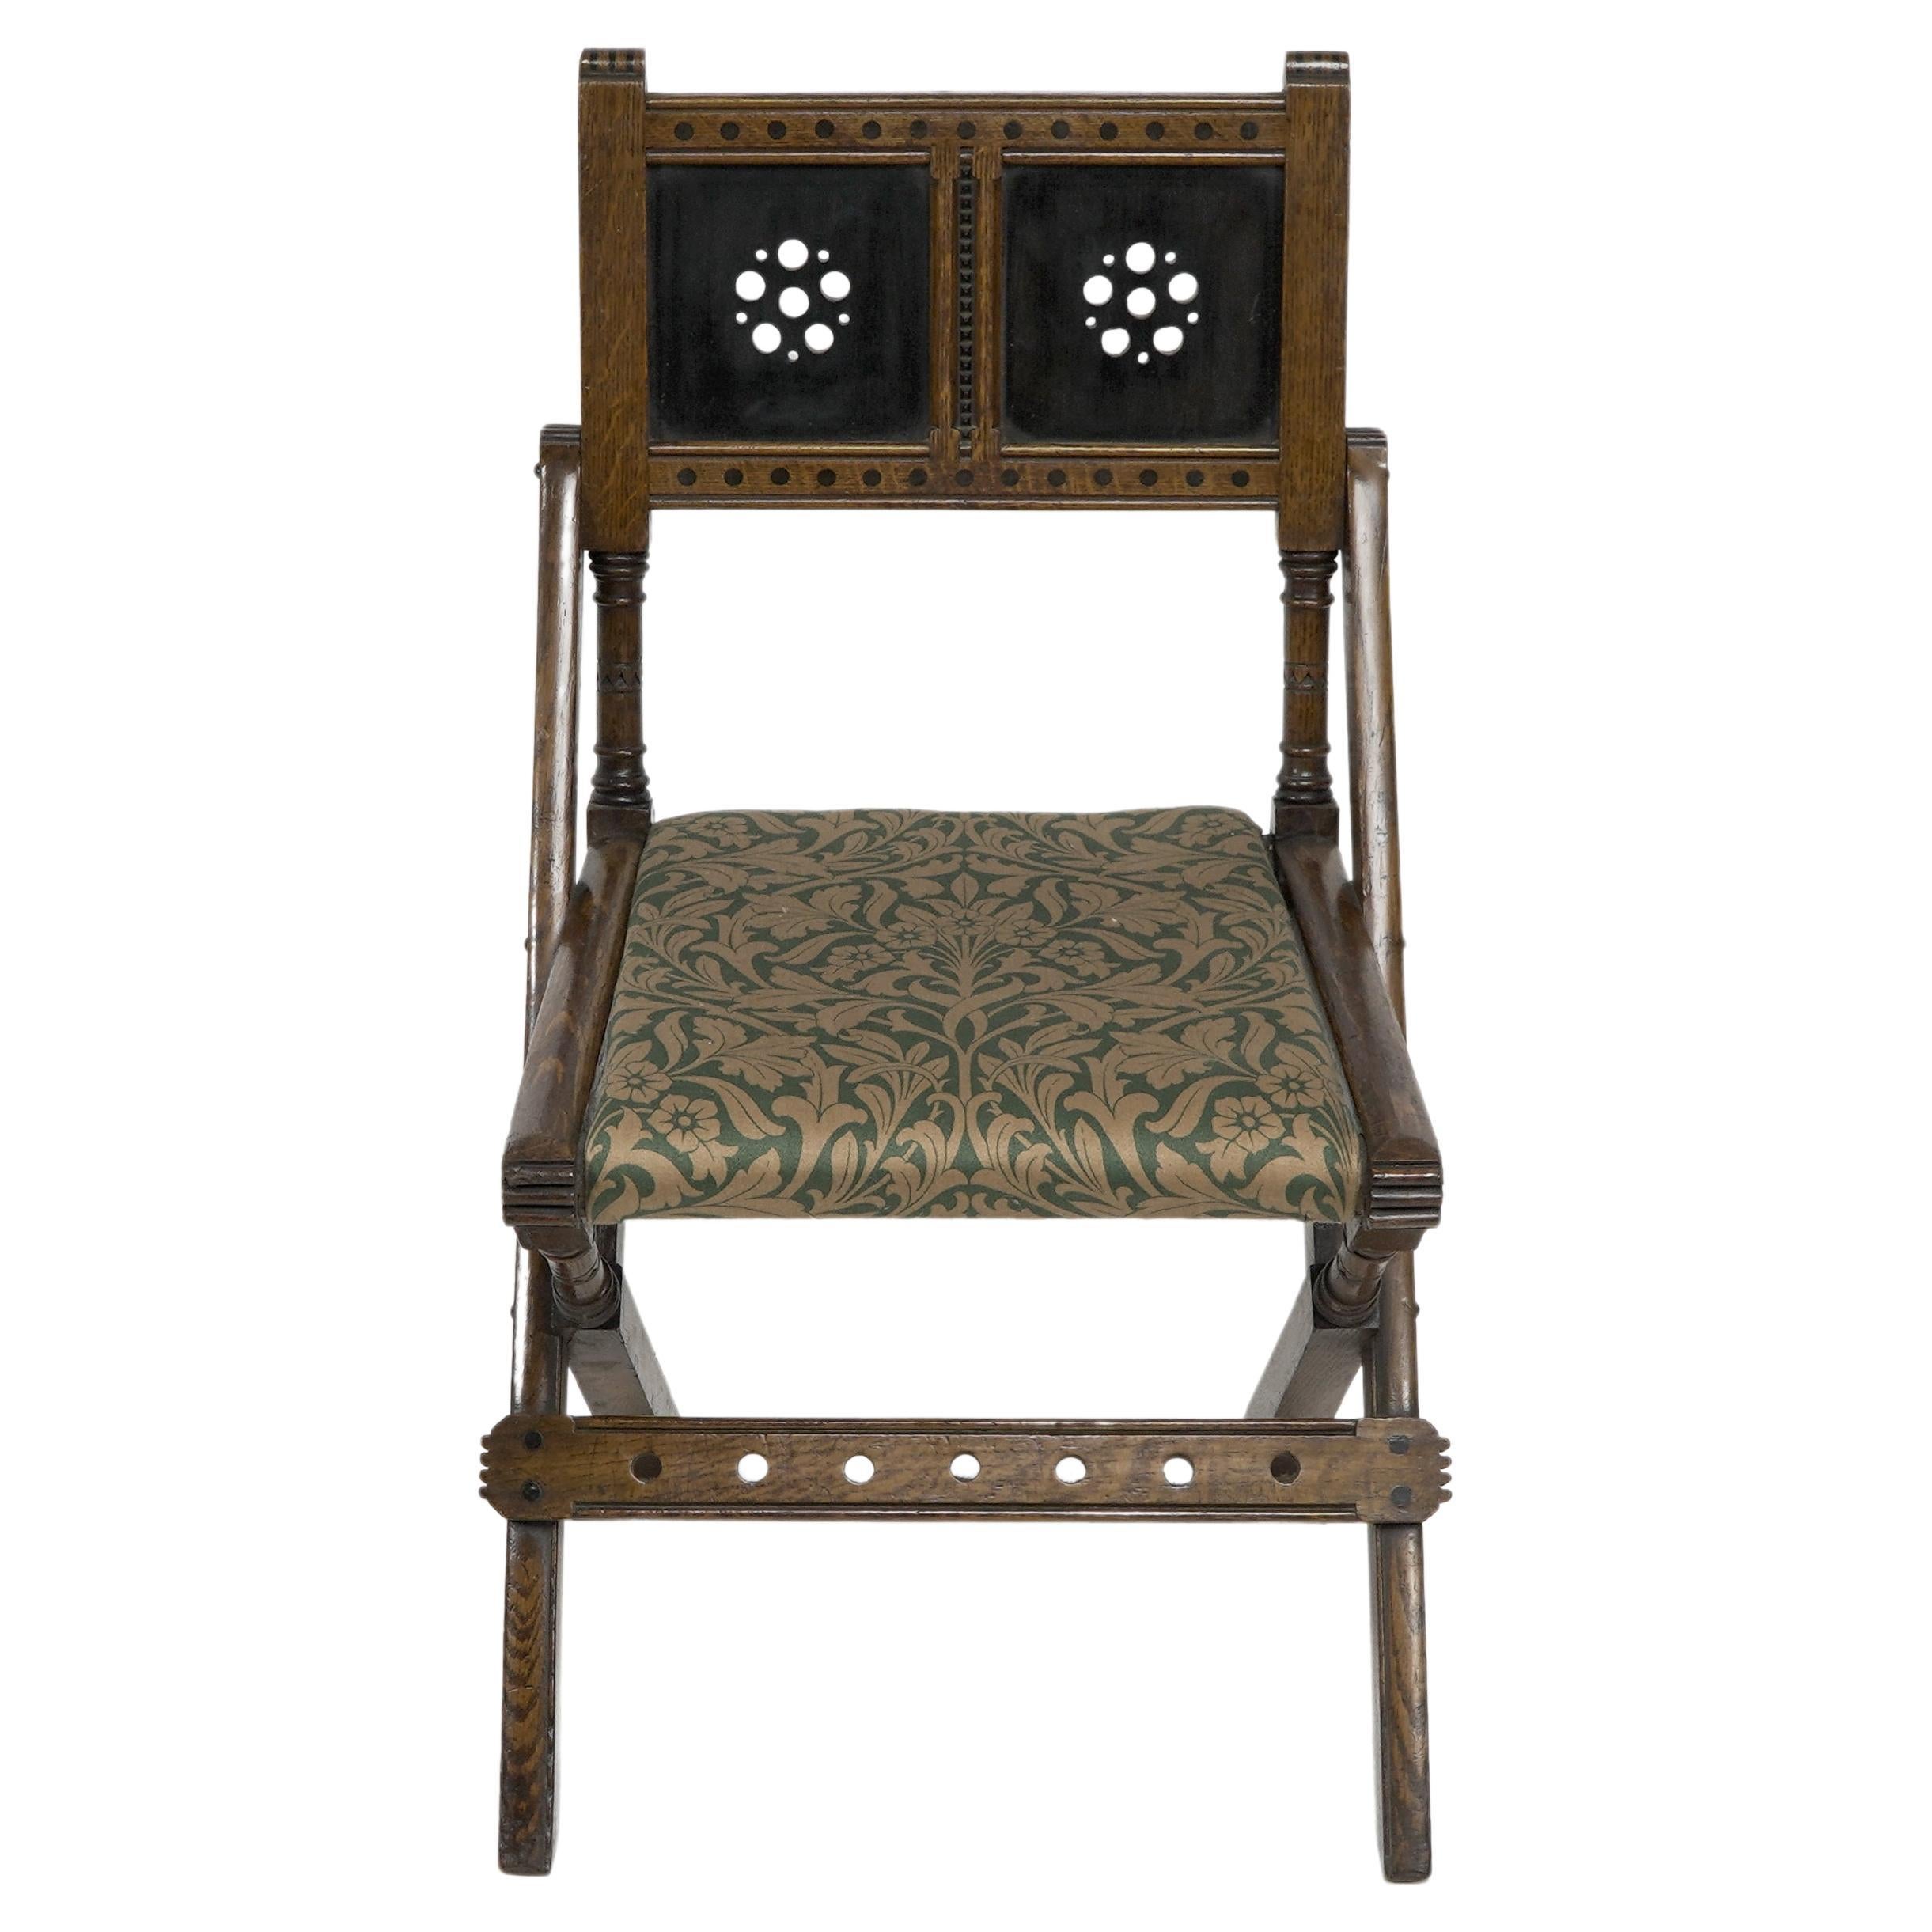 Bruce Talbert for Gillows and Co. An Aesthetic Movement scissor style side chair with ebonized dot details and chip carved details to the frame, the back panels with ebonized through circular decoration to the centres, with chevron carved details to